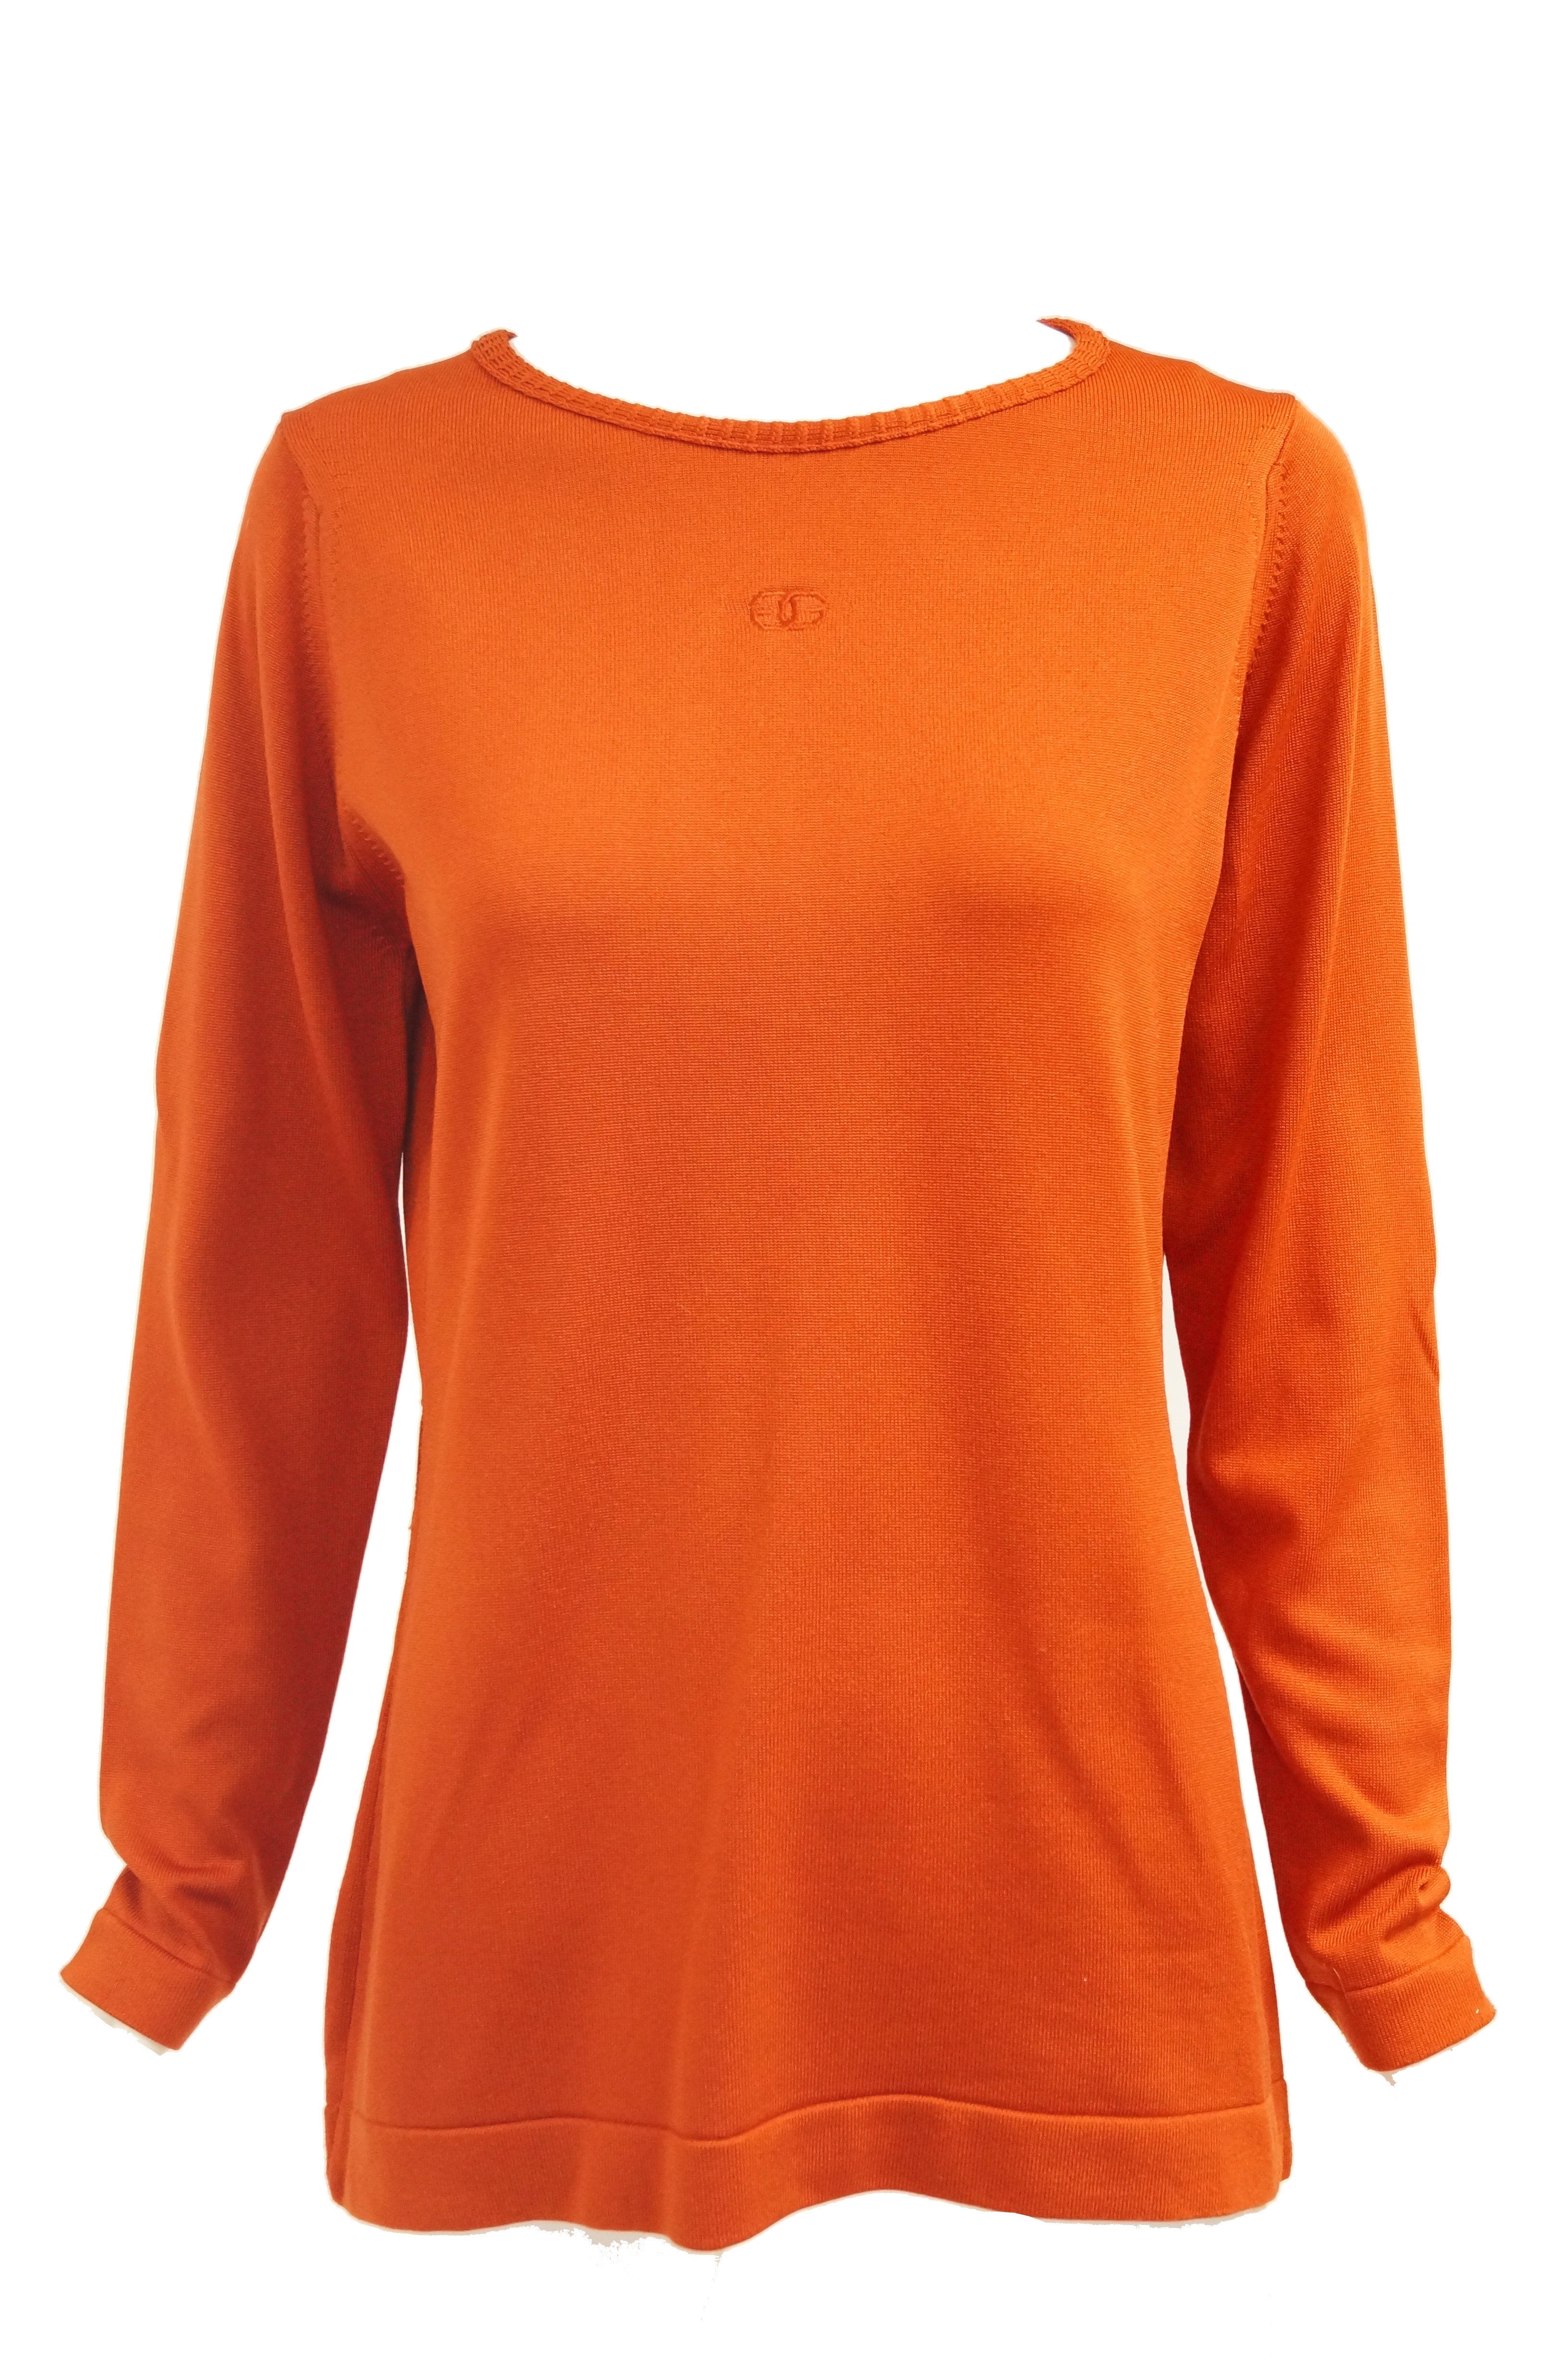 1970s Givenchy Sport Tangerine Orange Pullover Sweater - MRS Couture